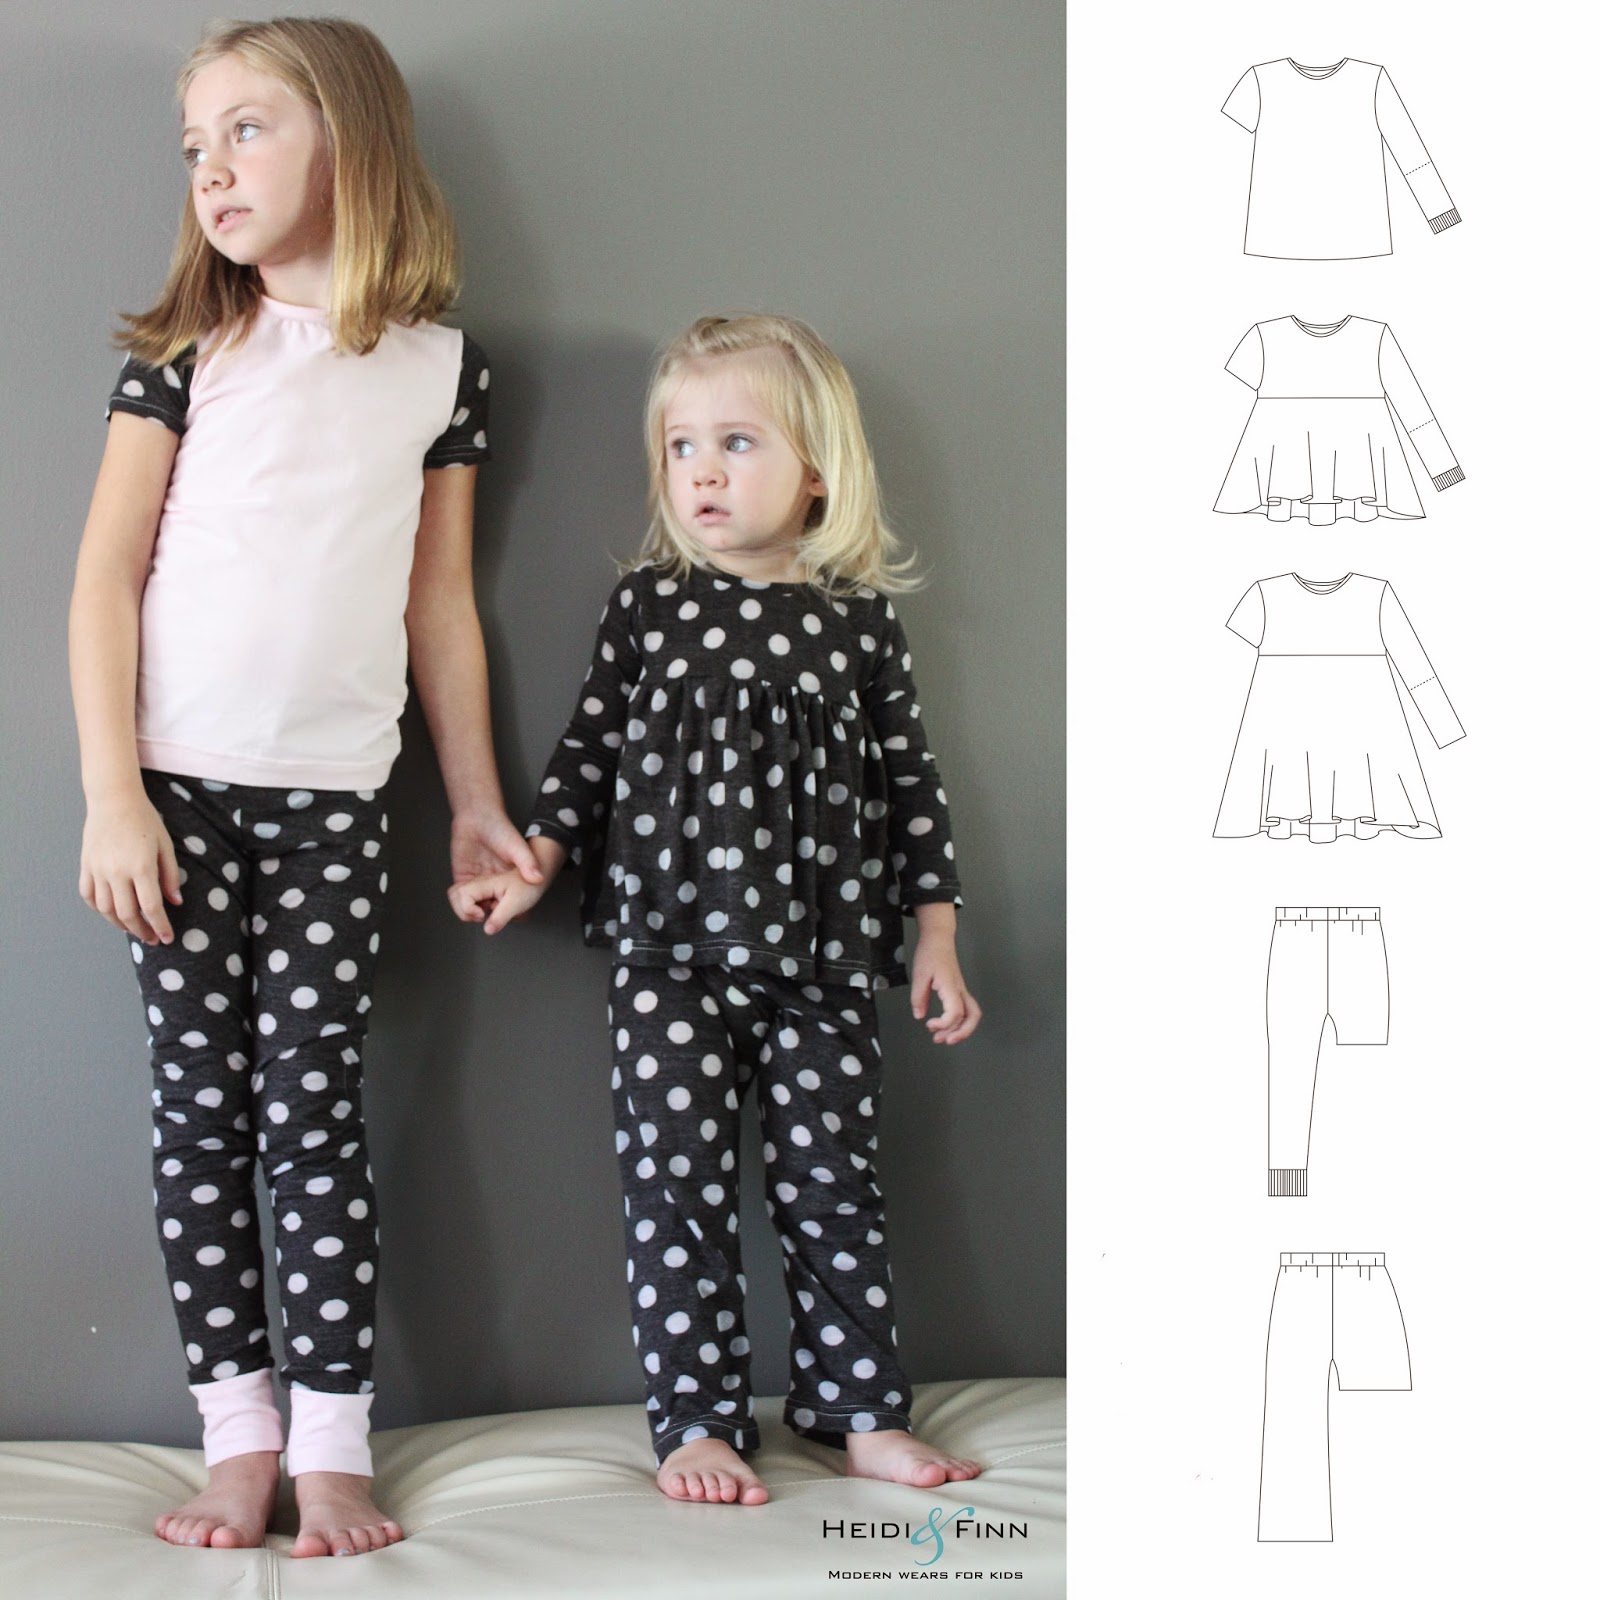 https://www.etsy.com/listing/203002210/new-all-you-need-jammies-pajamas-pattern?ref=shop_home_feat_3